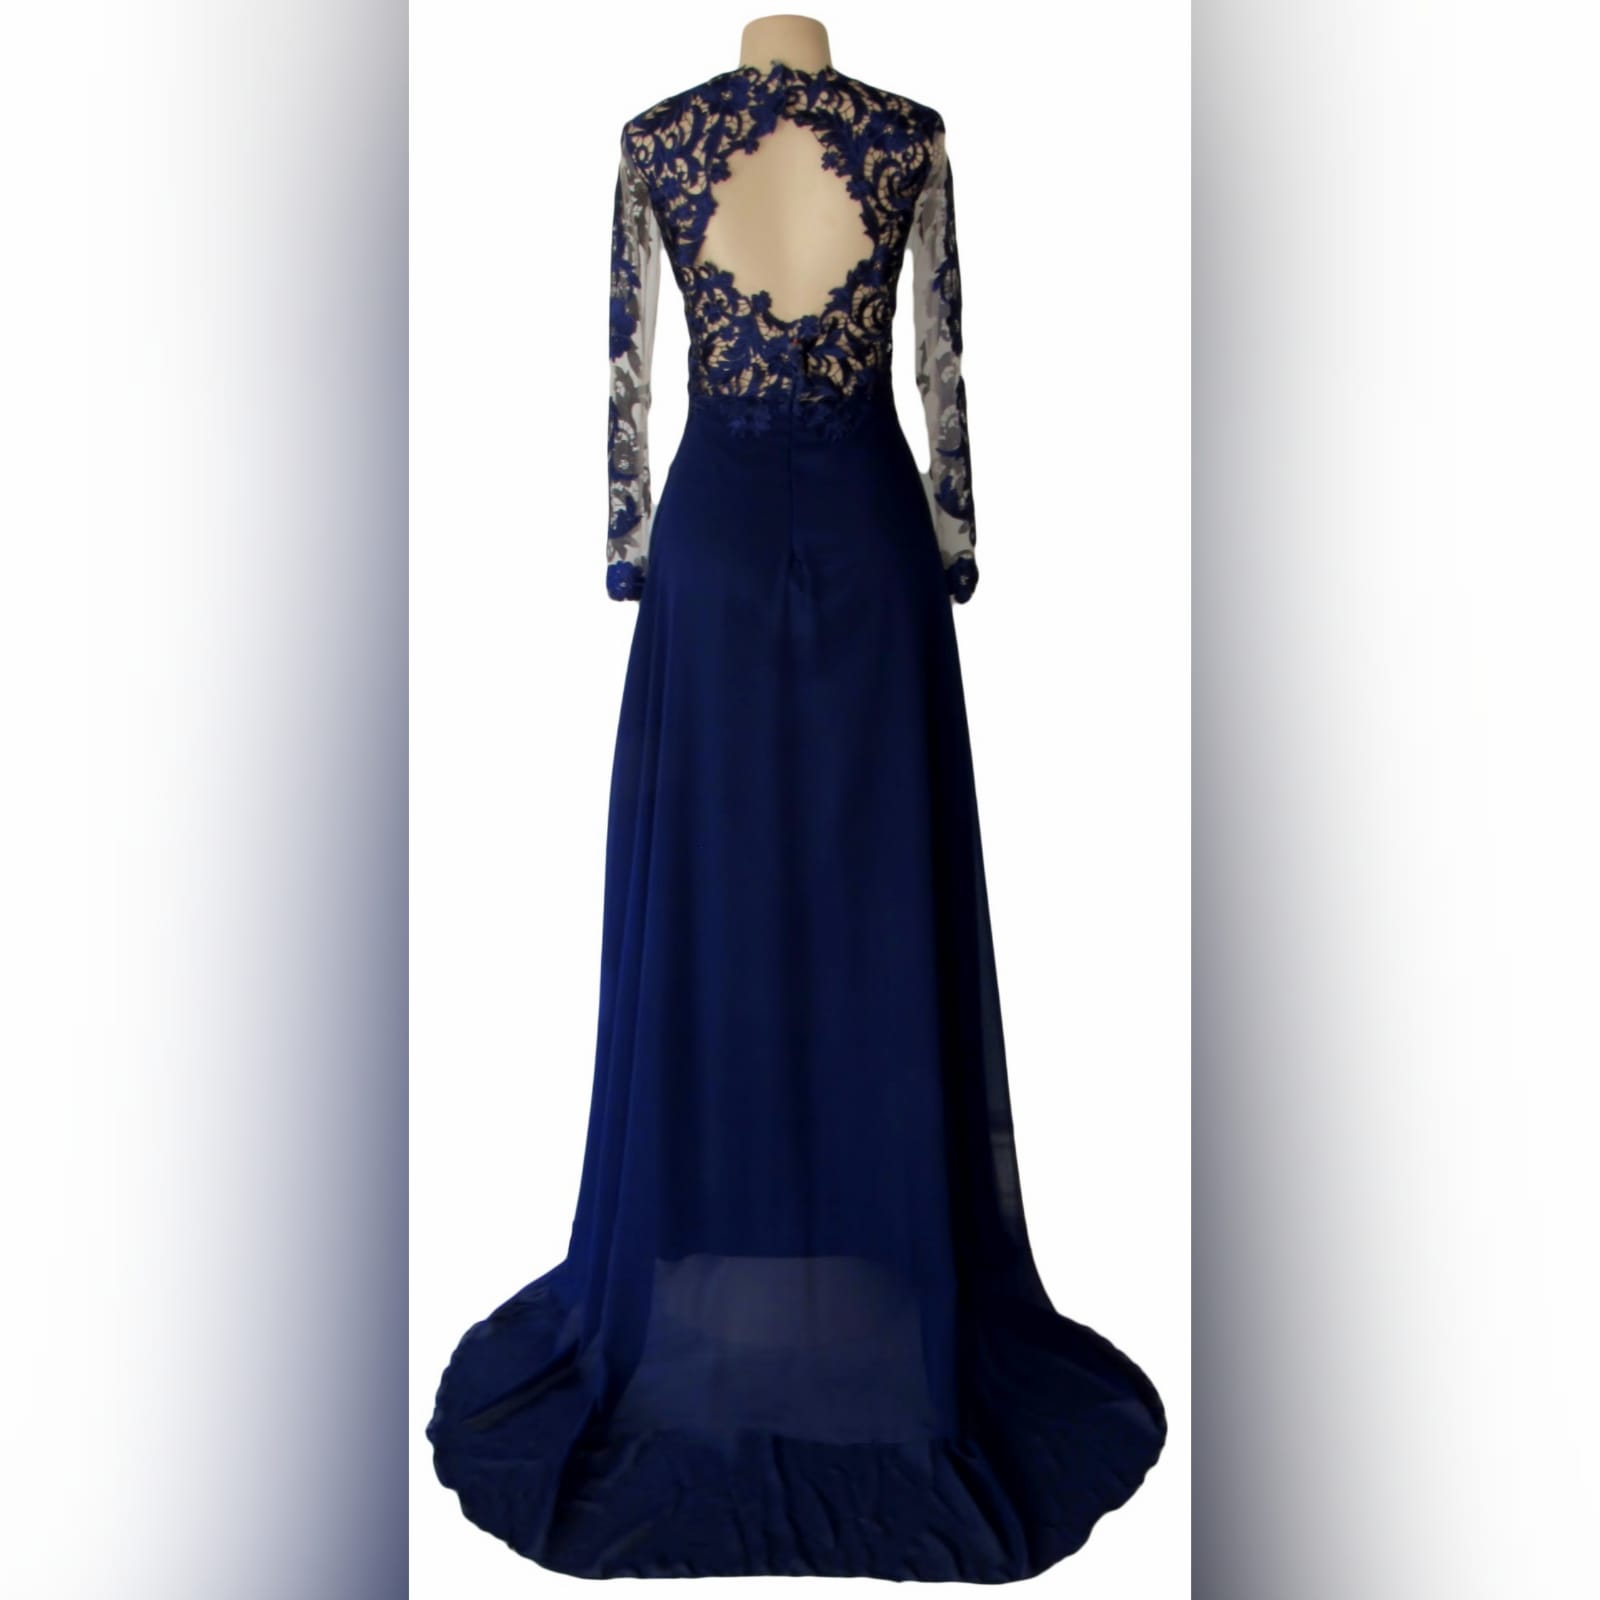 Navy blue lace bodice flowy prom dress 2 navy blue lace bodice flowy matric dance dress with a slit and a train. Illusion long sleeves and a diamond shaped open back.